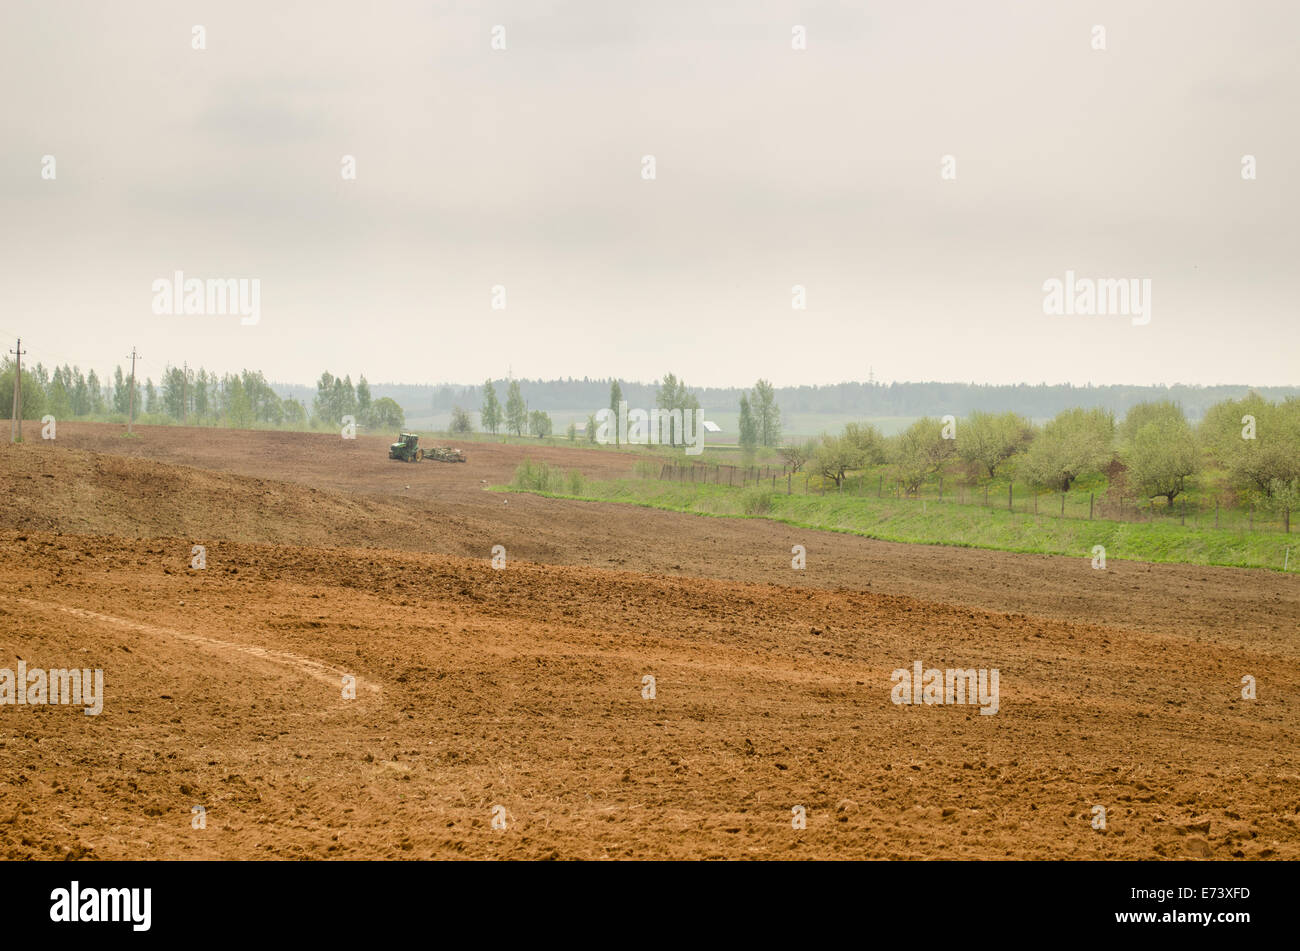 wide big brown plowed field in rural image with tractor in the distance Stock Photo